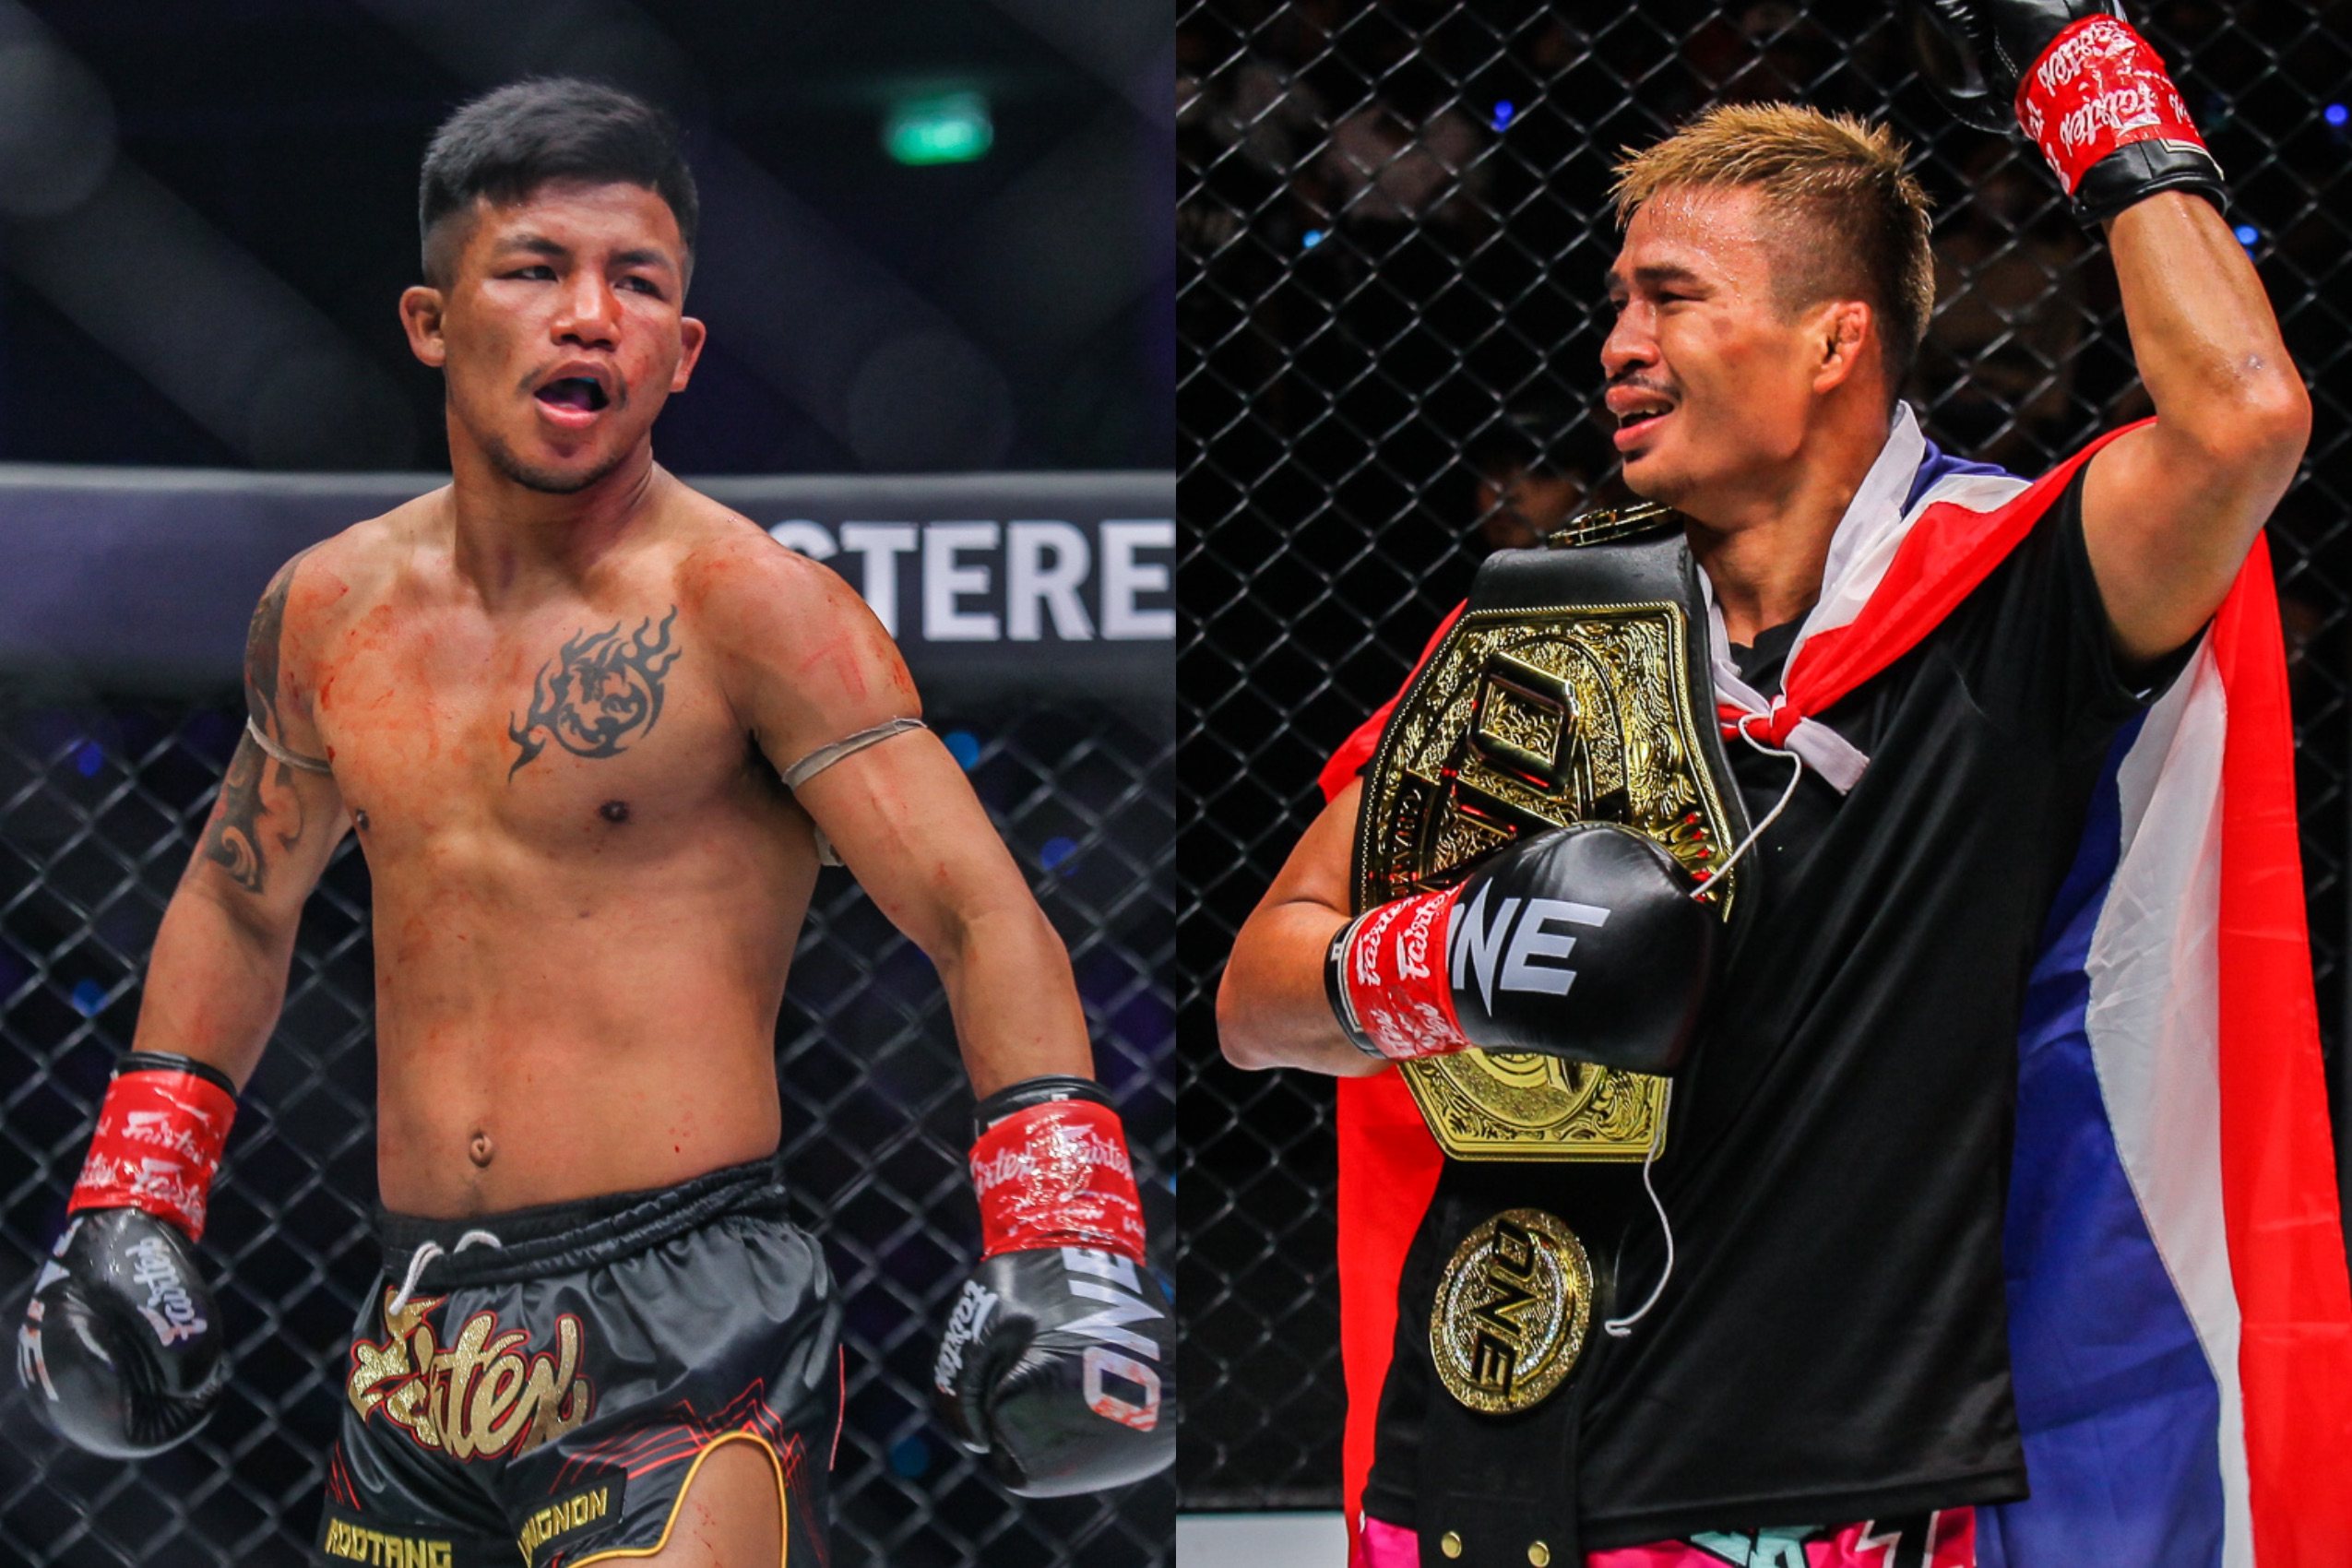 Rodtang Jitmuangnon (left) and Superlek Kiatmoo9 were set to fight for flyweight kickboxing gold at ONE Fight Night 8 in Singapore. Photos: ONE Championship.